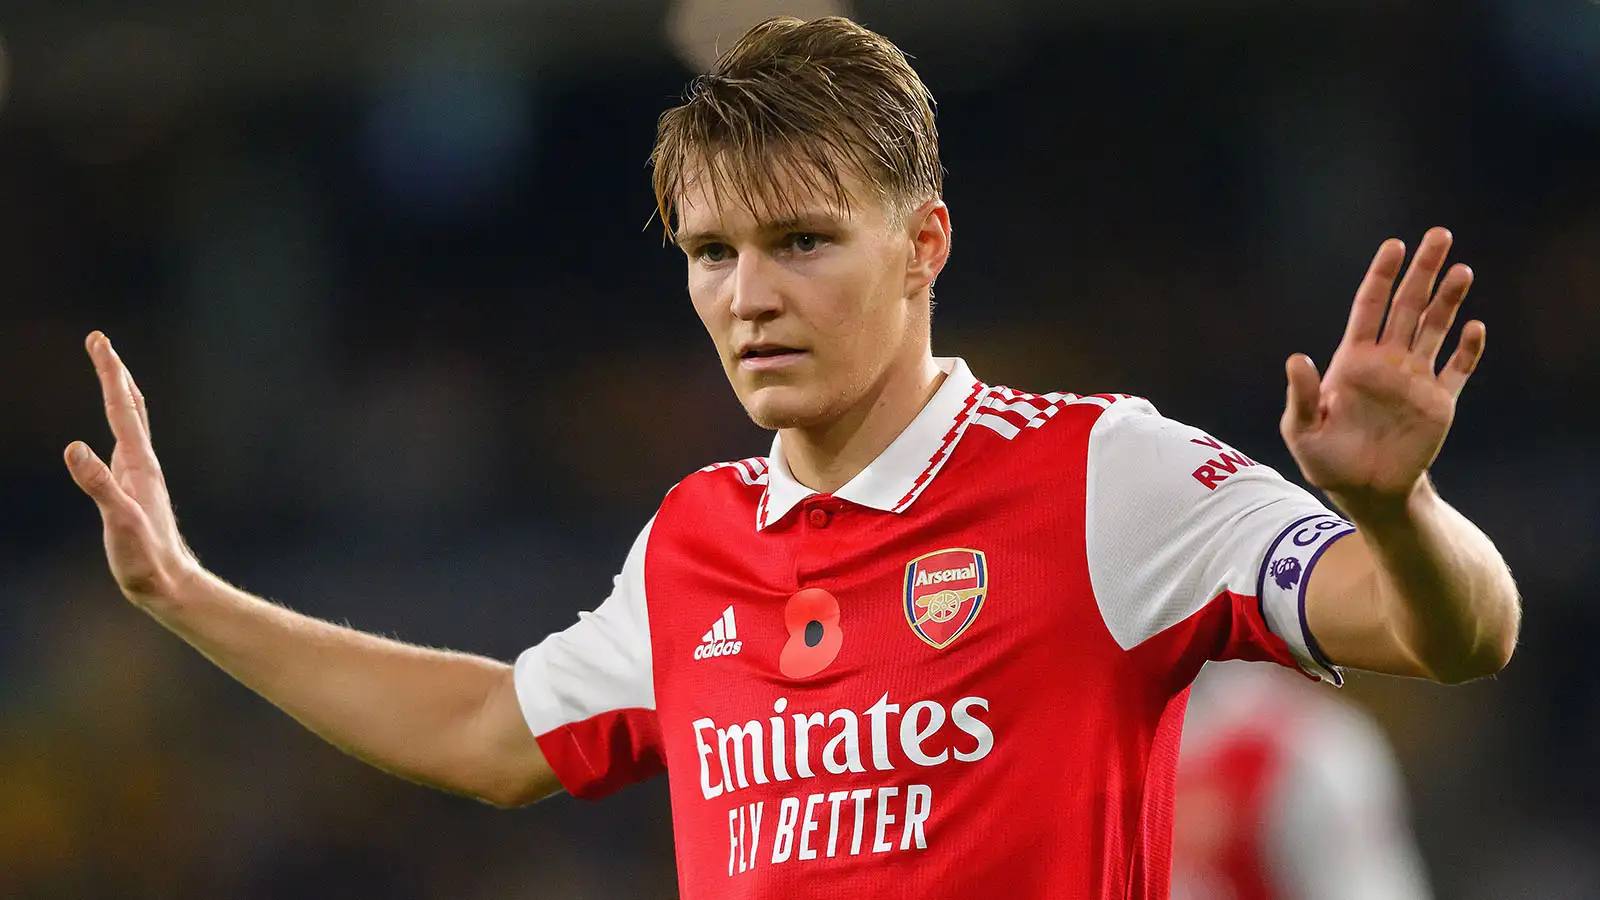 Watch: Martin Odegaard rinses two West Ham stars with filthy nutmeg